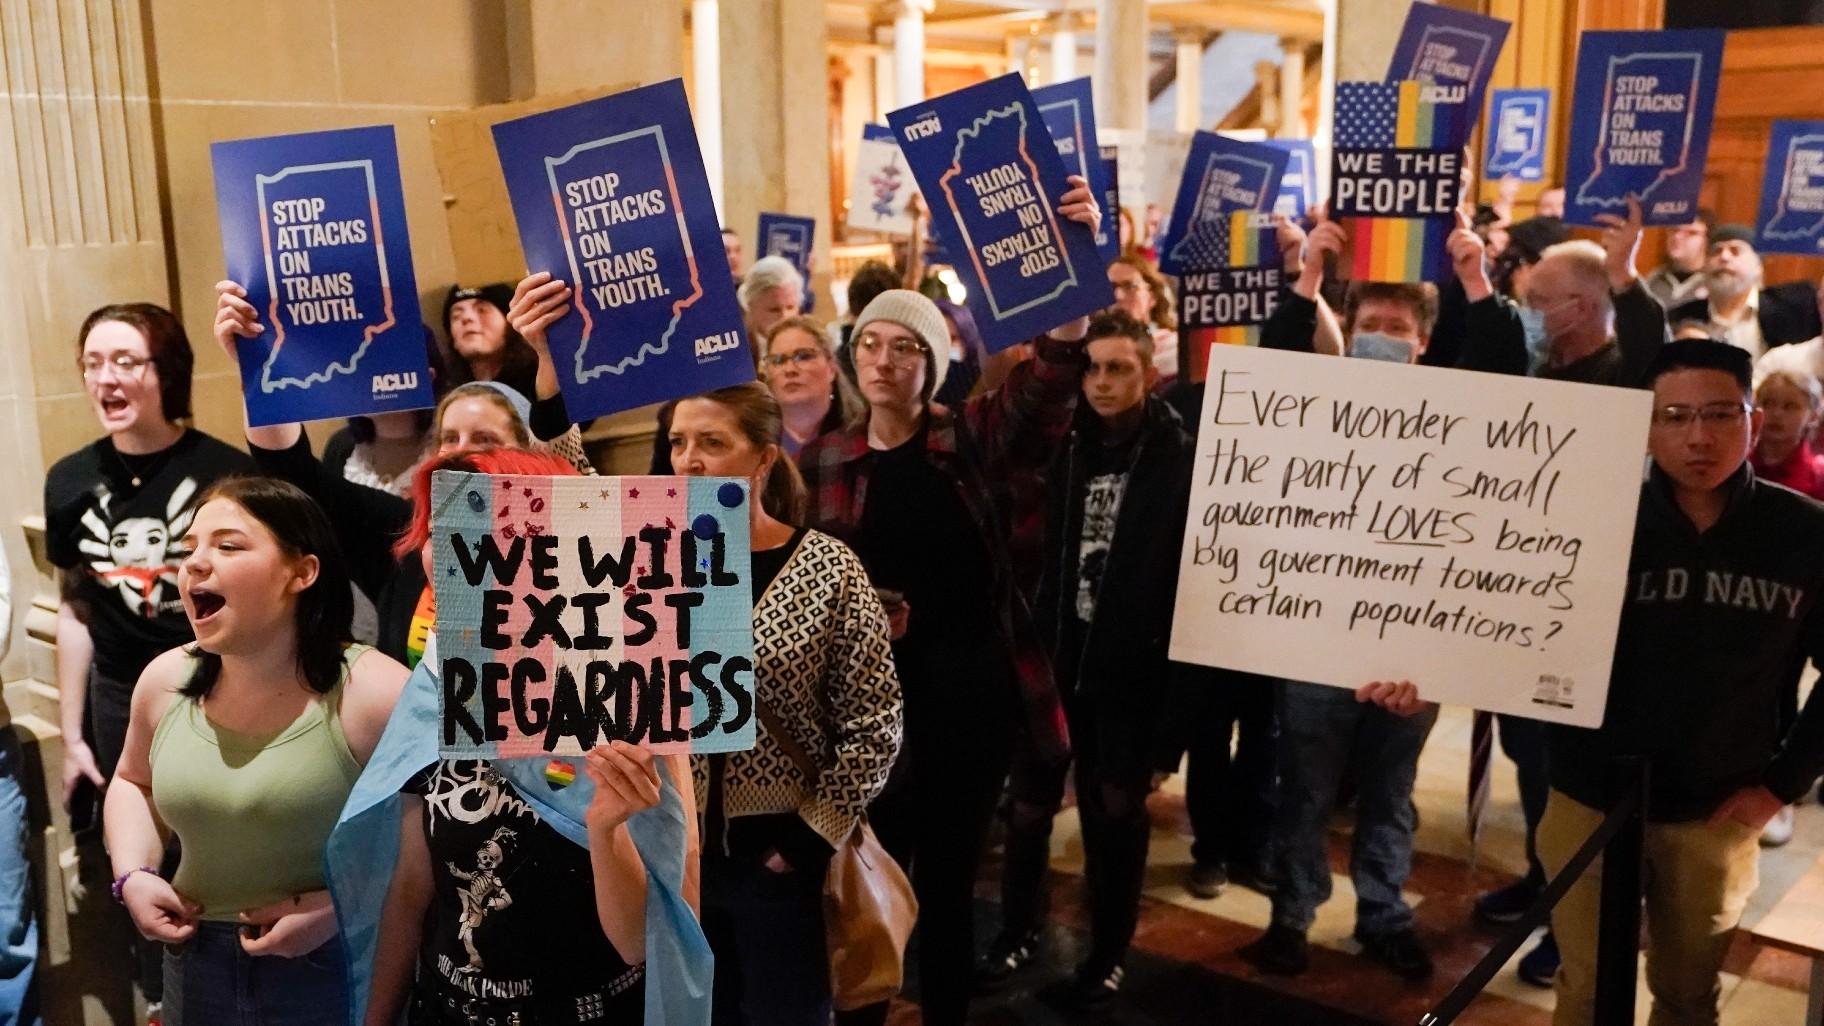 Protesters stand outside of the Senate chamber at the Indiana Statehouse on Feb. 22, 2023, in Indianapolis. (AP Photo / Darron Cummings, File)